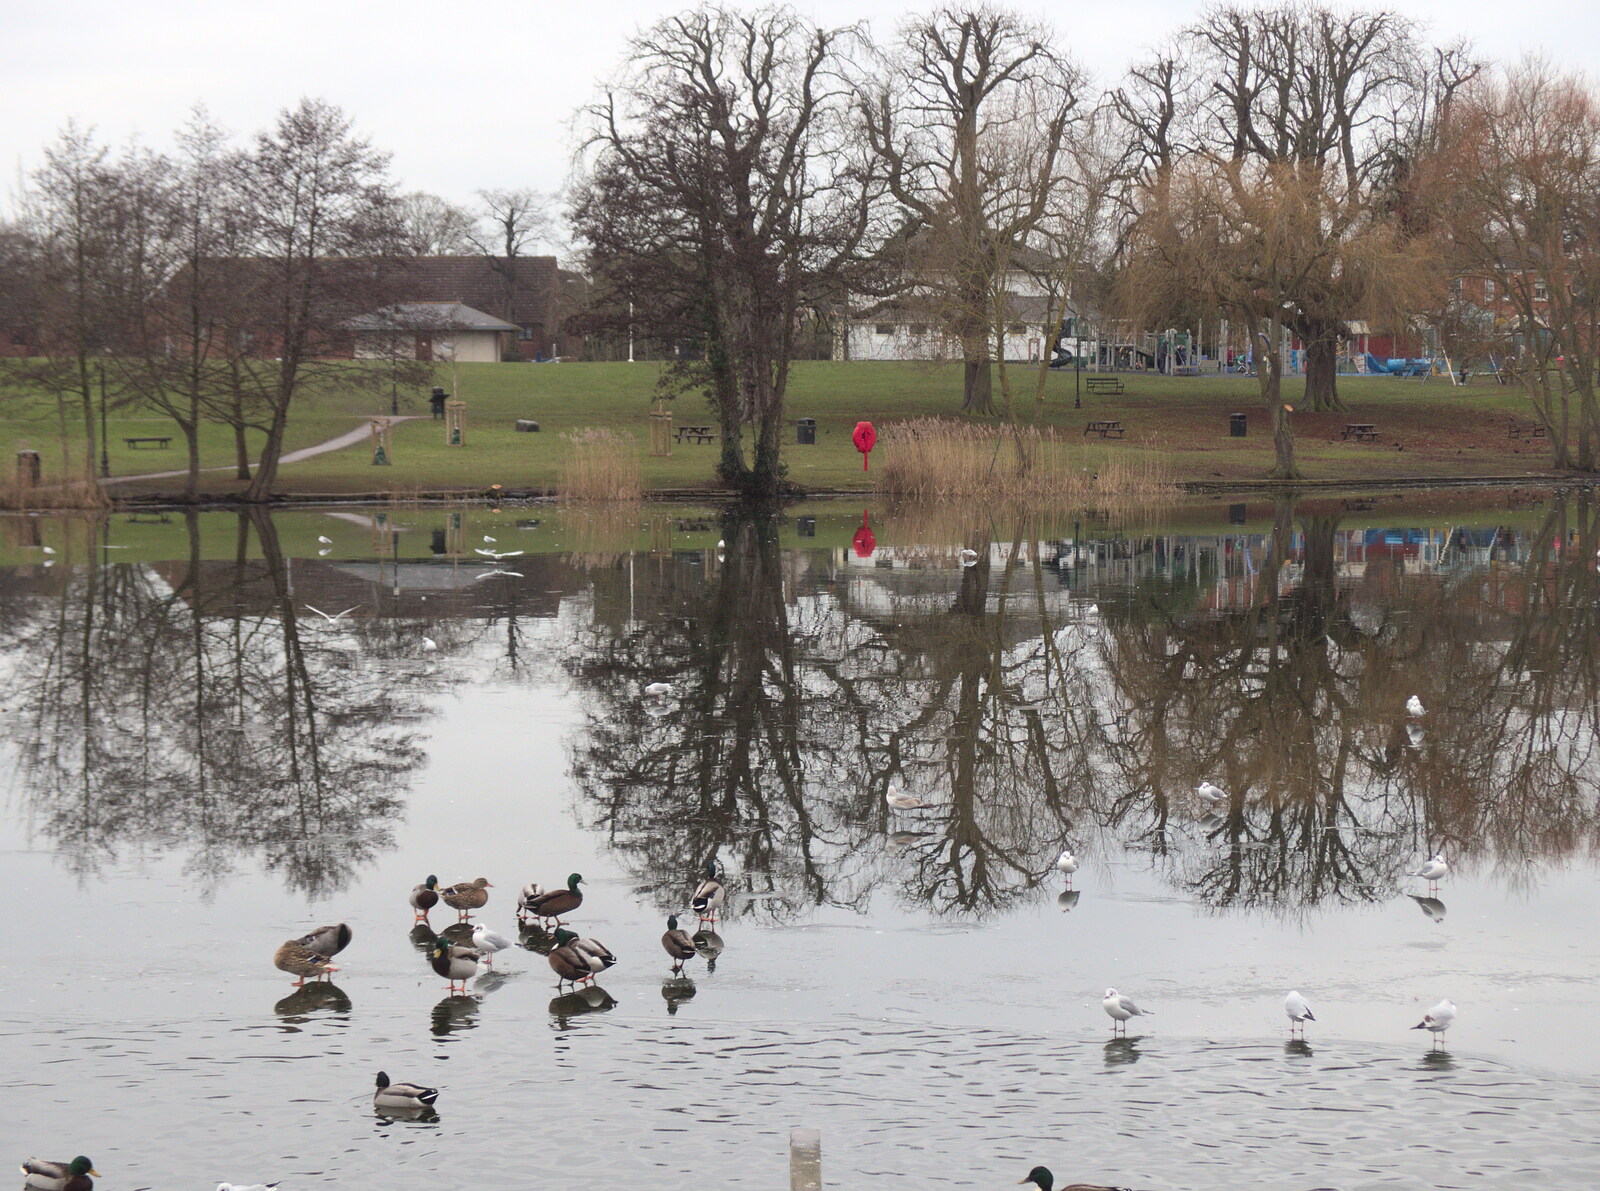 Ducks stand on the frozen Mere from Grandad's Fire and SwiftKey Moves Offices, Eye and Paddington - 23rd January 2017